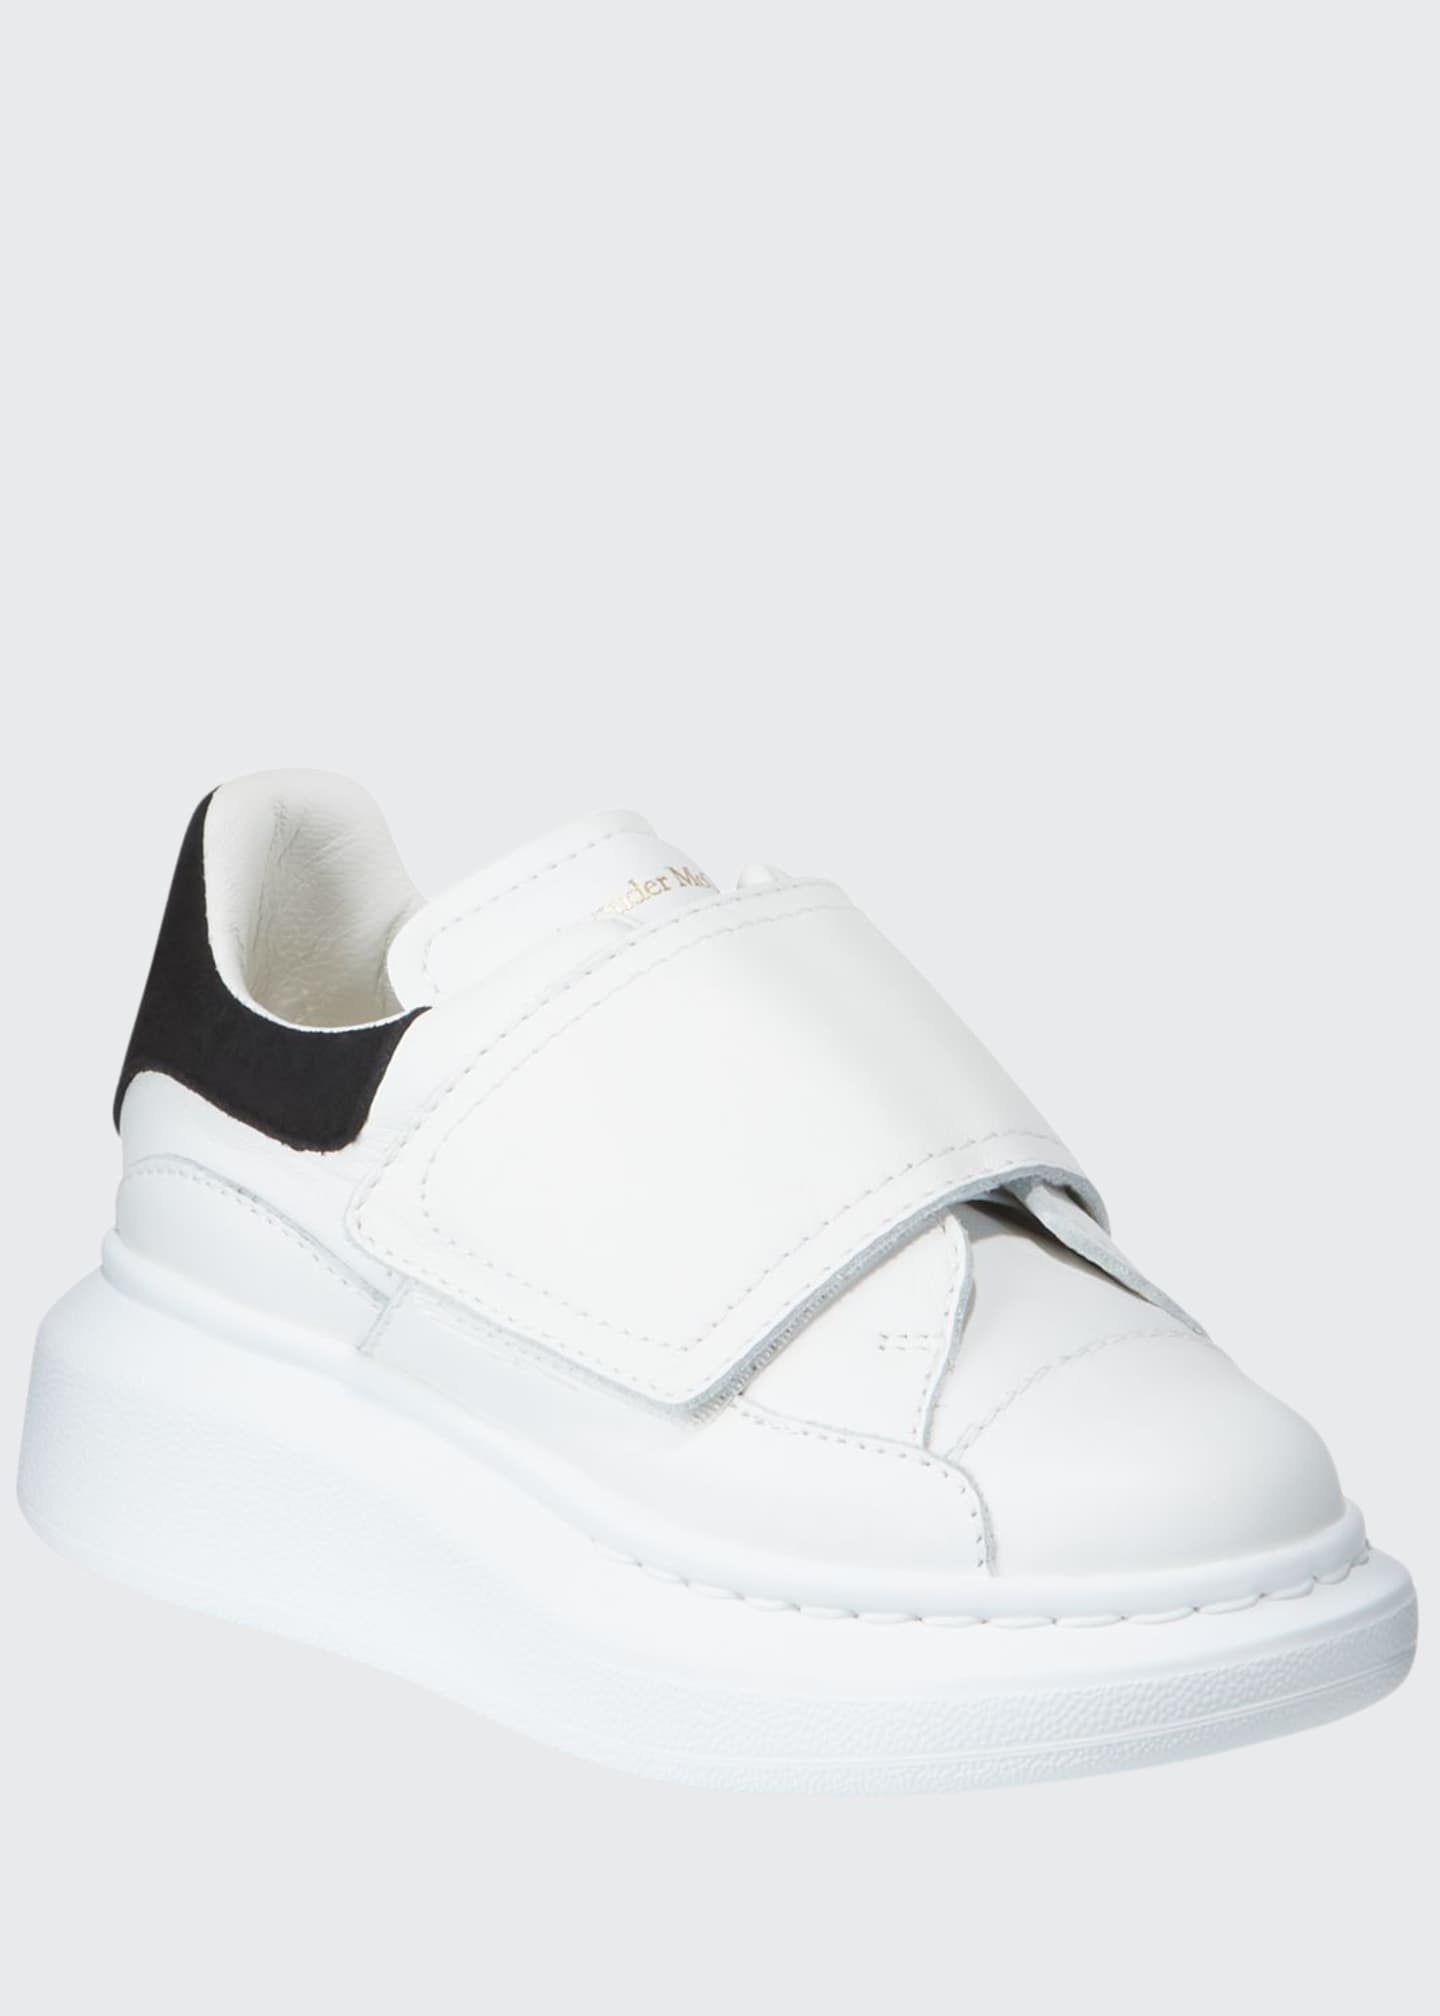 mcqueen shoes for kids